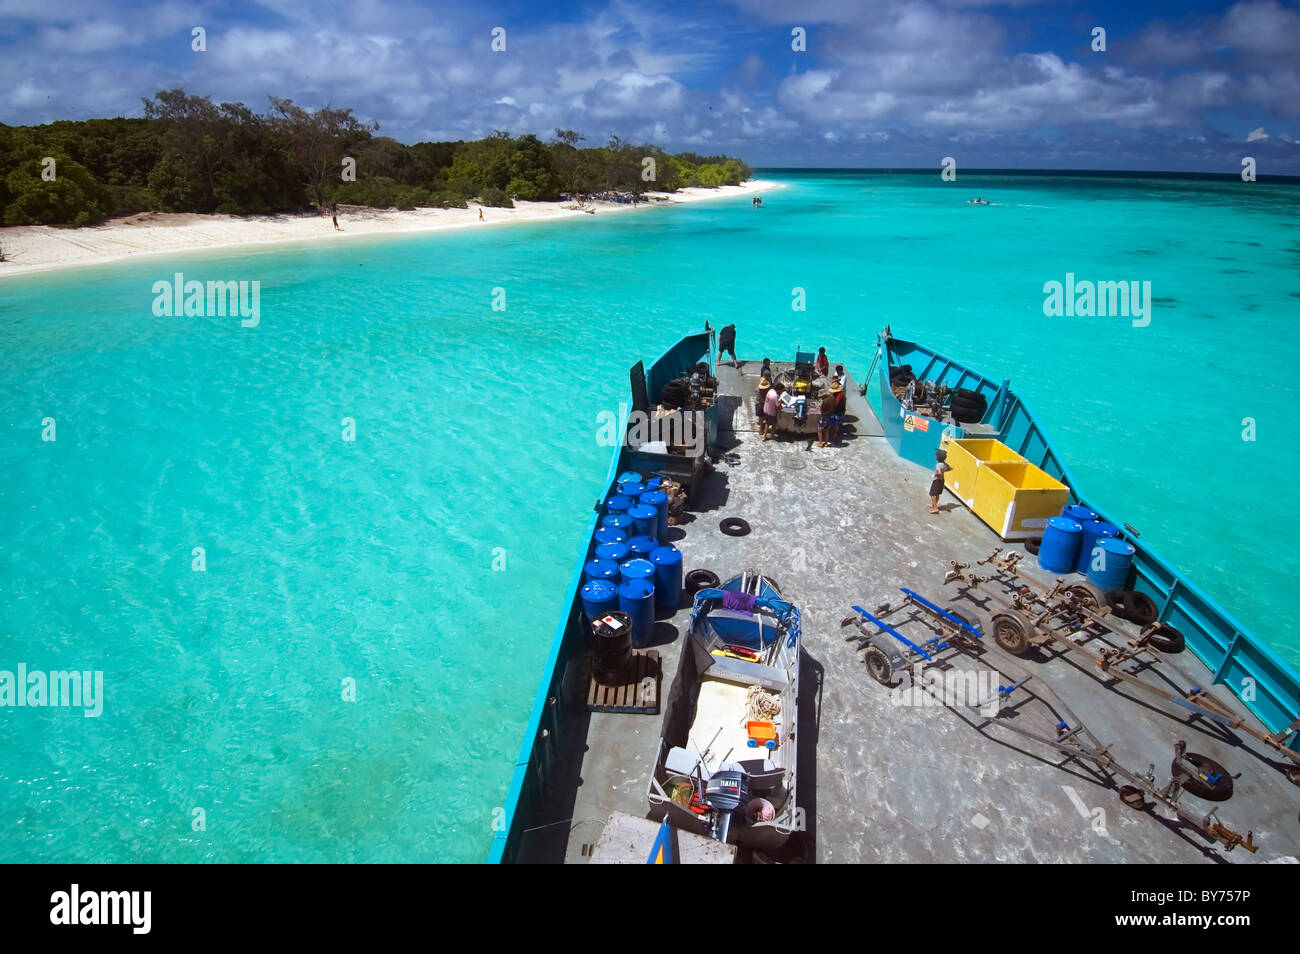 Loading boats onto barge at North West Island, Capricorn Bunker Group, southern Great Barrier Reef, Queensland, Australia Stock Photo